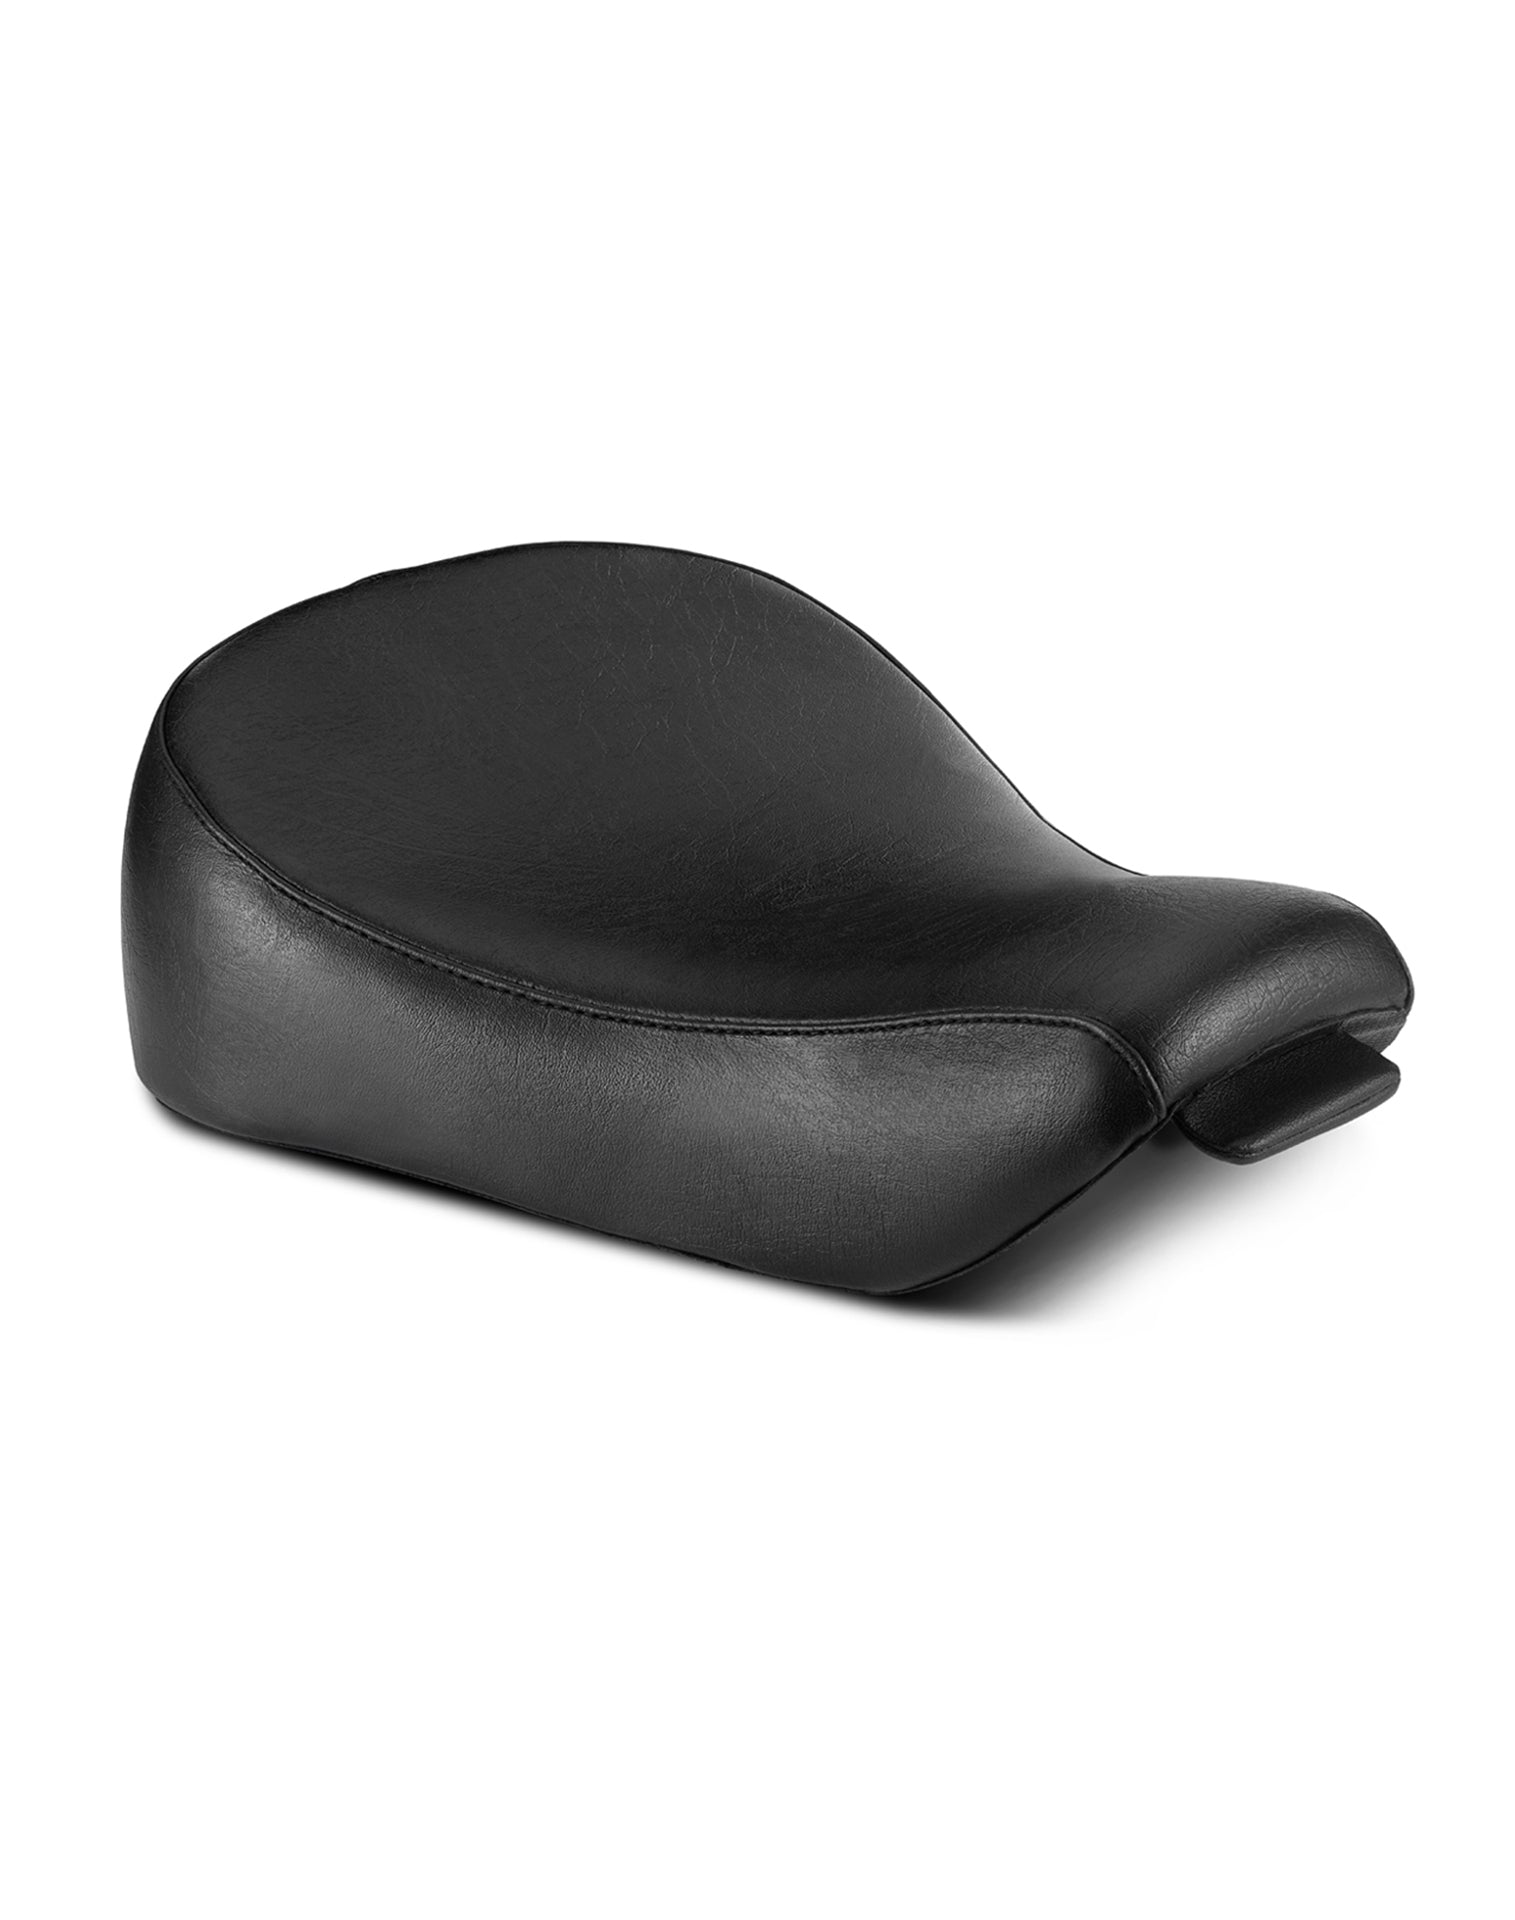 Iron Born Plain Design Motorcycle Solo Seat for Sportster SuperLow Main view